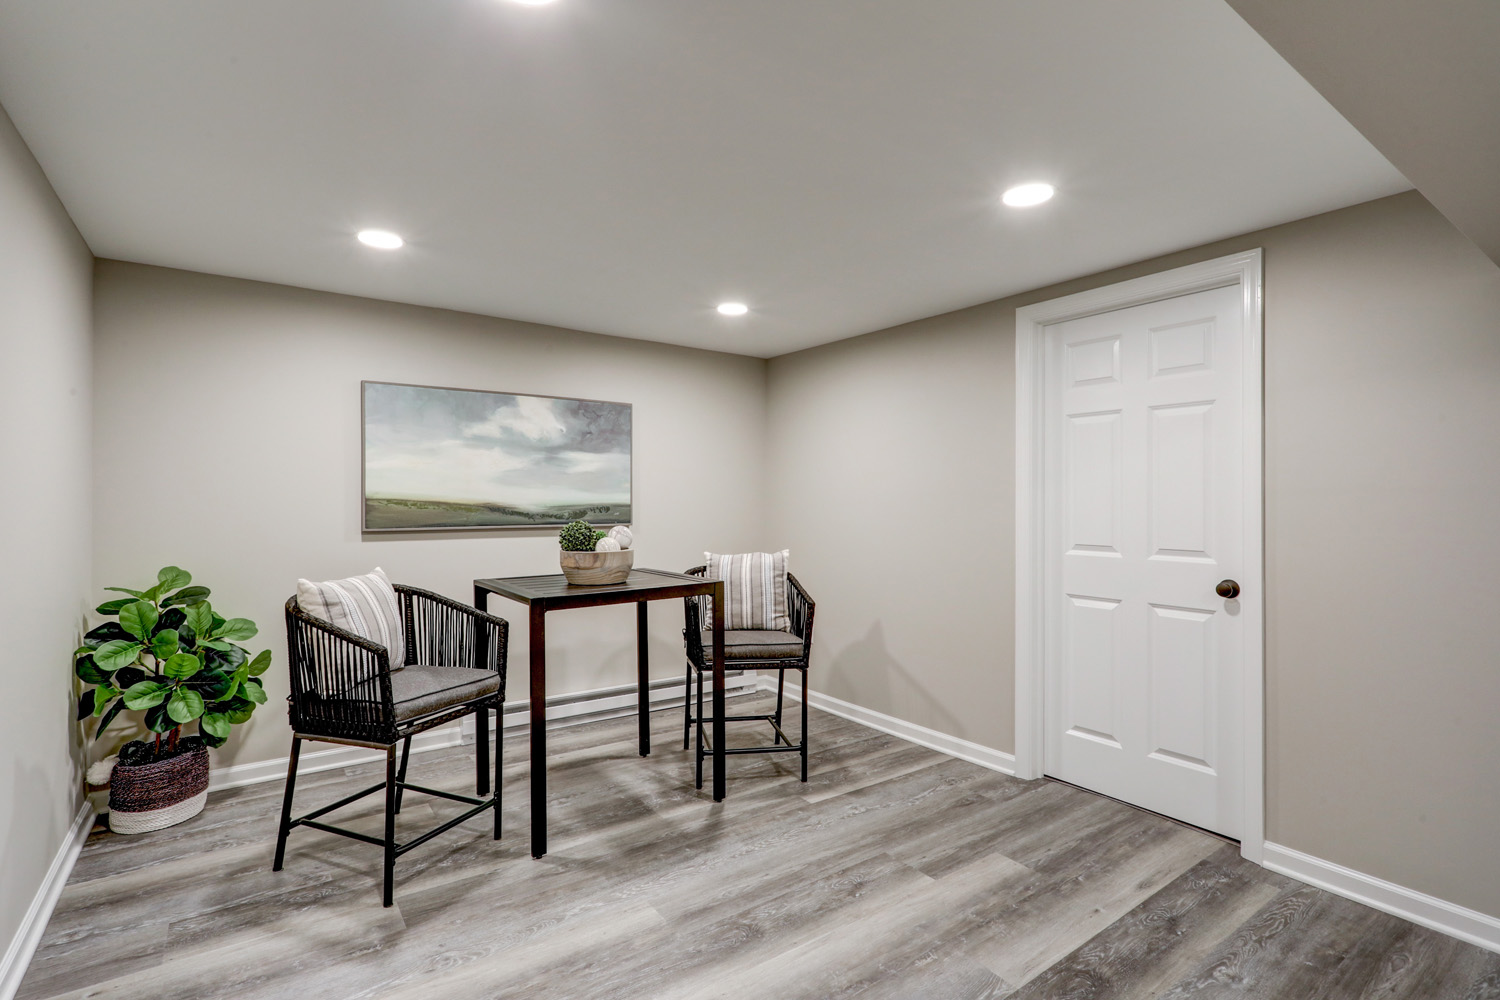 Office area in Manheim Township Basement Remodel